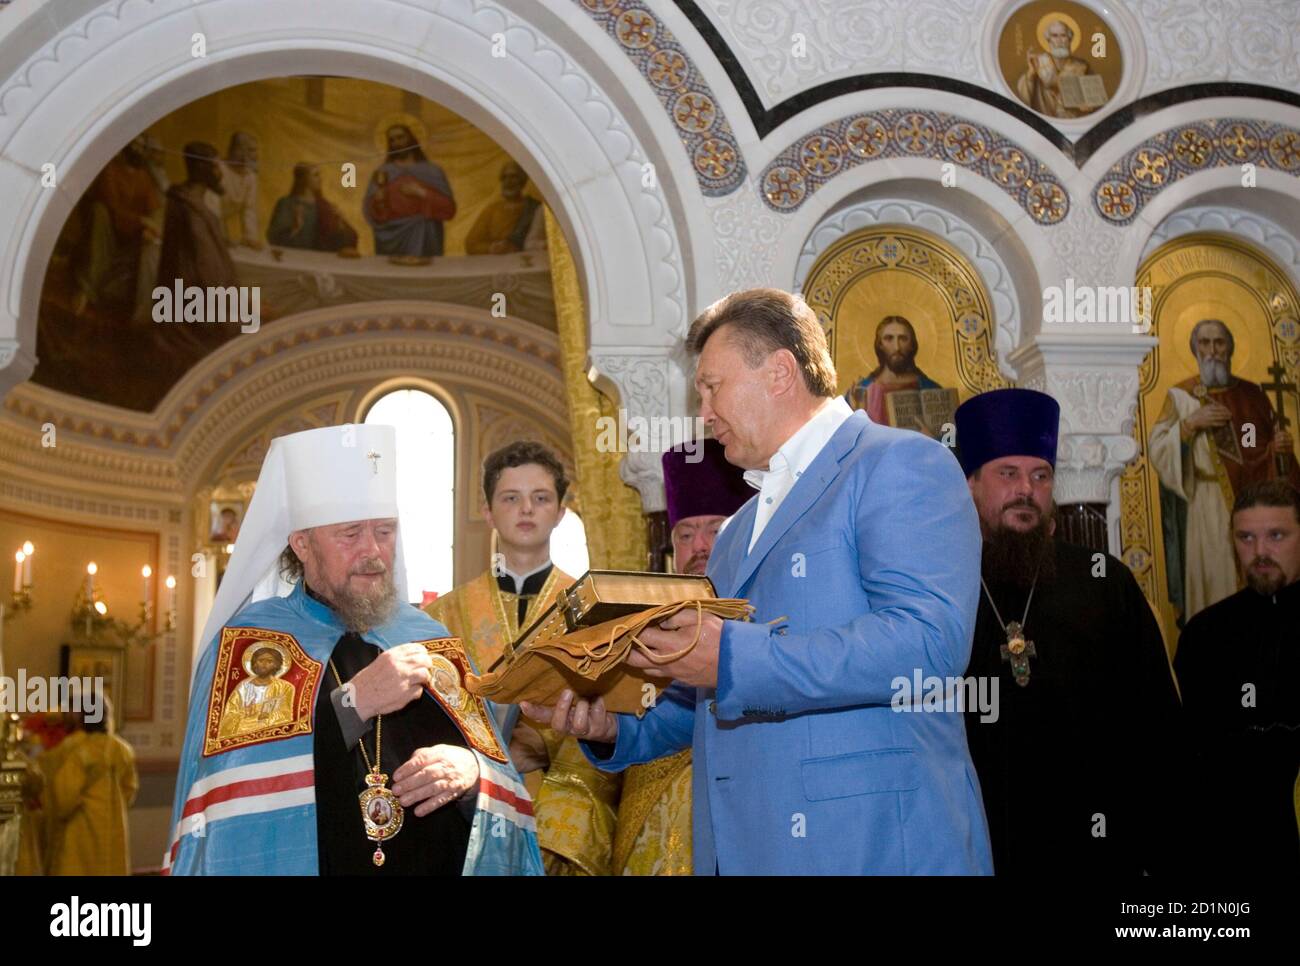 Ukraine's President Viktor Yanukovich (centre R) attends a religious service marking his country's adoption of Christianity, in the town of Khersones July 28, 2010. Ukraine and Russia today marked their official adoption of Christianity, which took place in Kiev, the capital of Kyivan Rus, by its grand prince Vladimir I in 988.  REUTERS/Mykhailo Markiv/Pool  (UKRAINE - Tags: POLITICS RELIGION ANNIVERSARY) Stock Photo